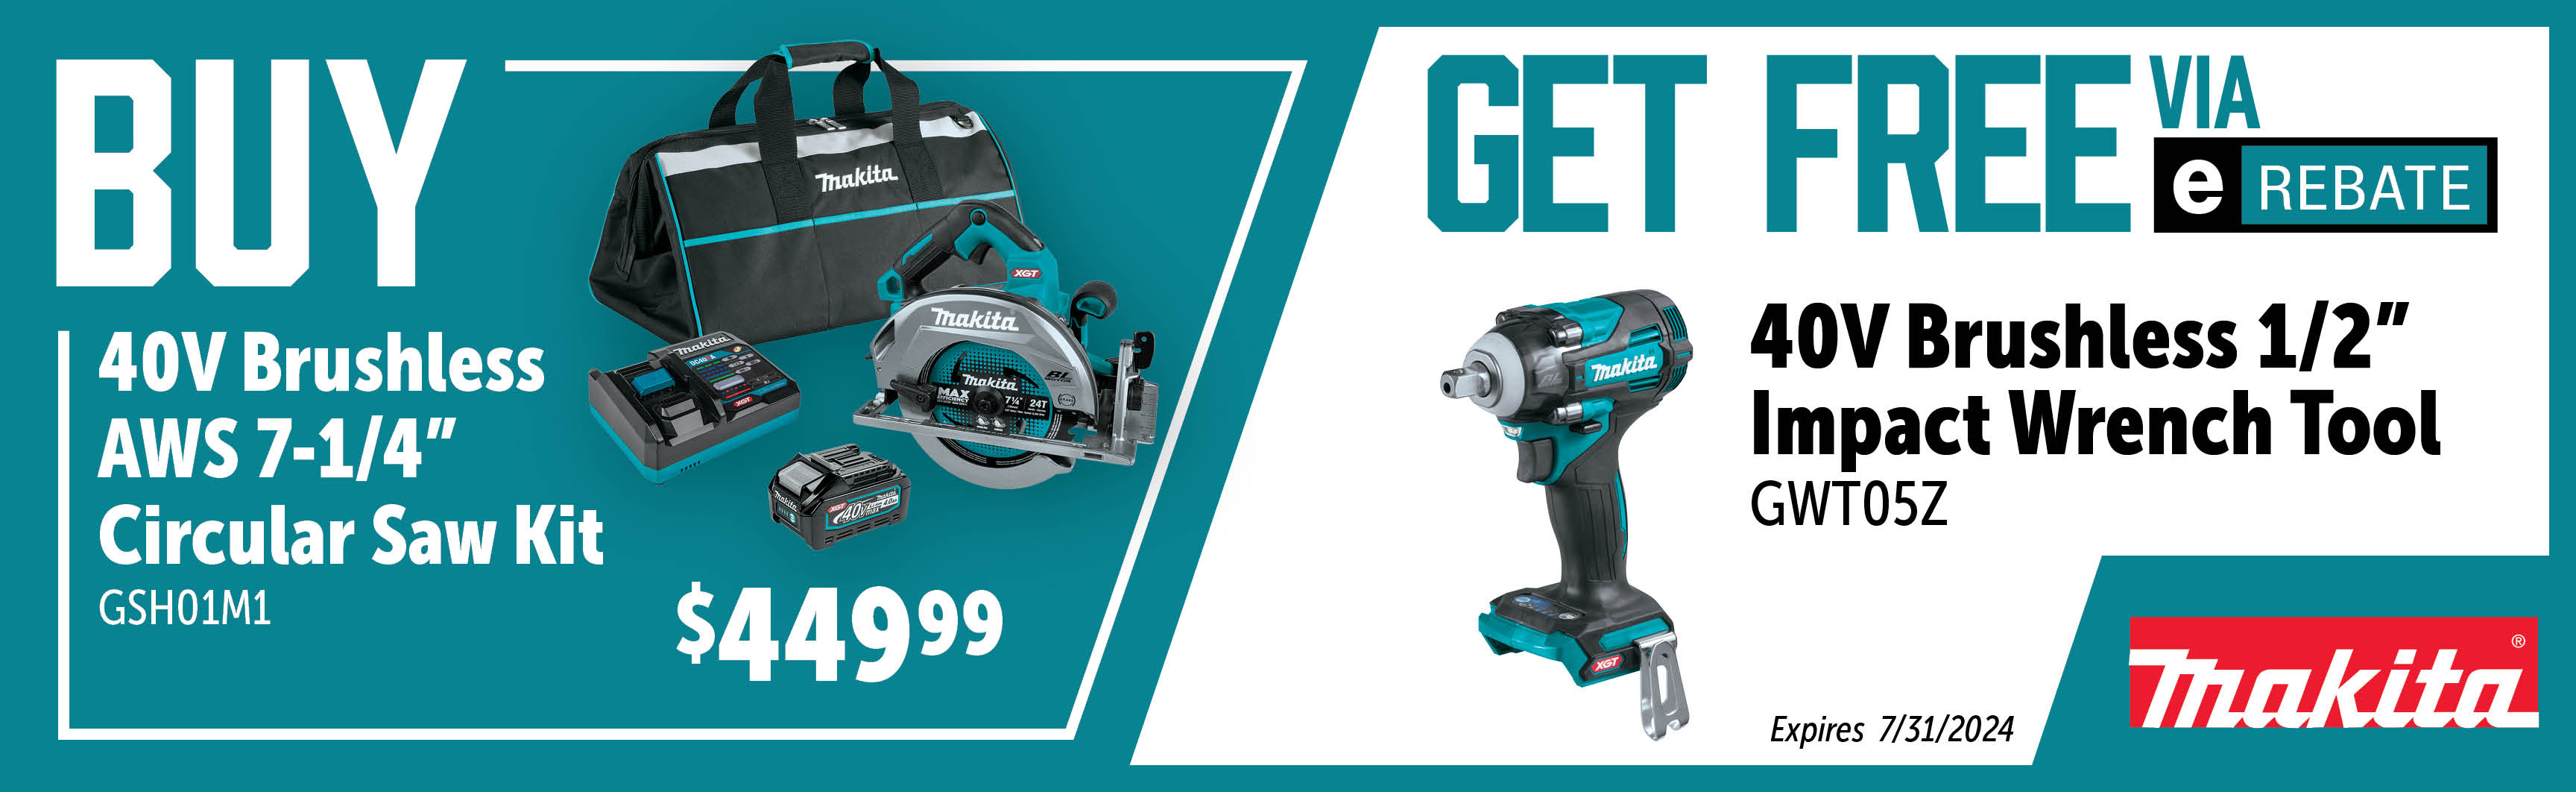 Makita May - July: Buy a GSH01M1 and Get a Free GWT05Z Via E-Rebate